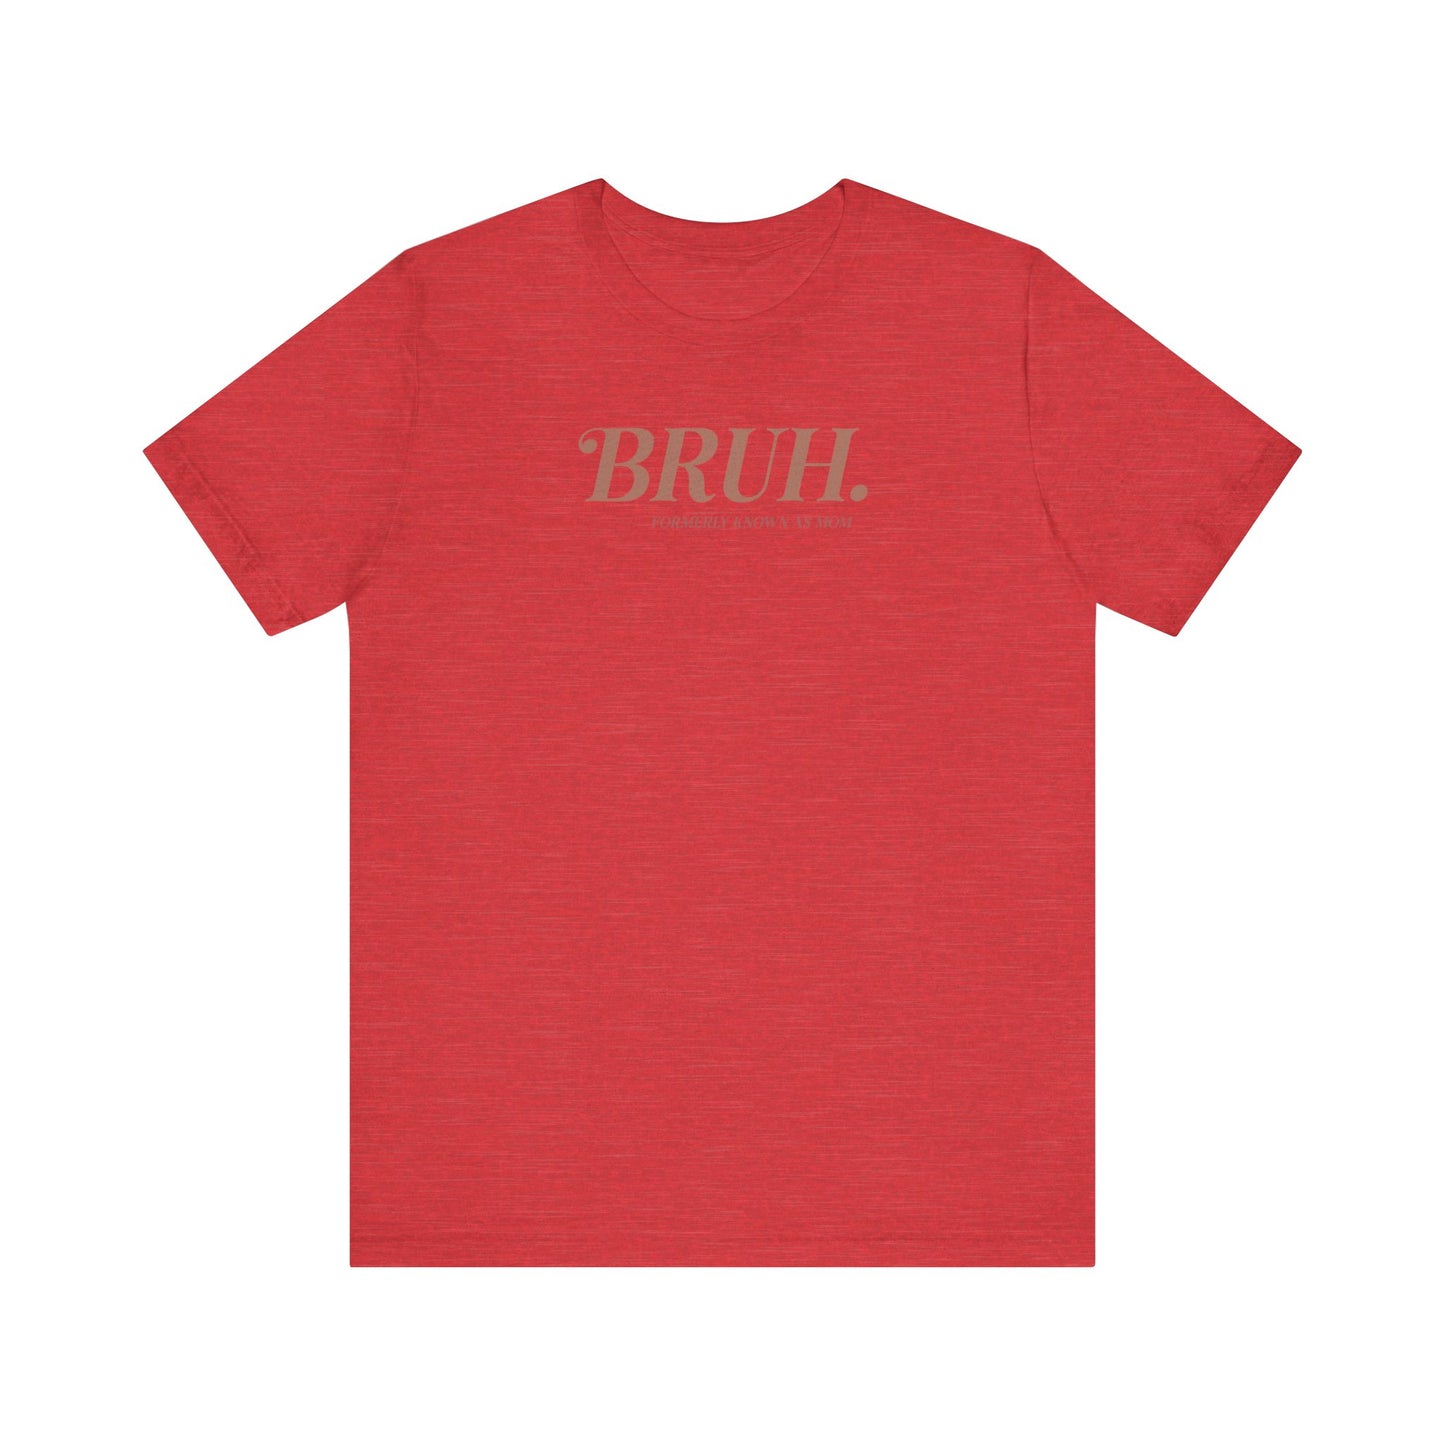 Bruh Formerly Known As Mom Shirt, Mother's Day Gift, Funny Mom Tee, Mama Tshirt (Mom-64)